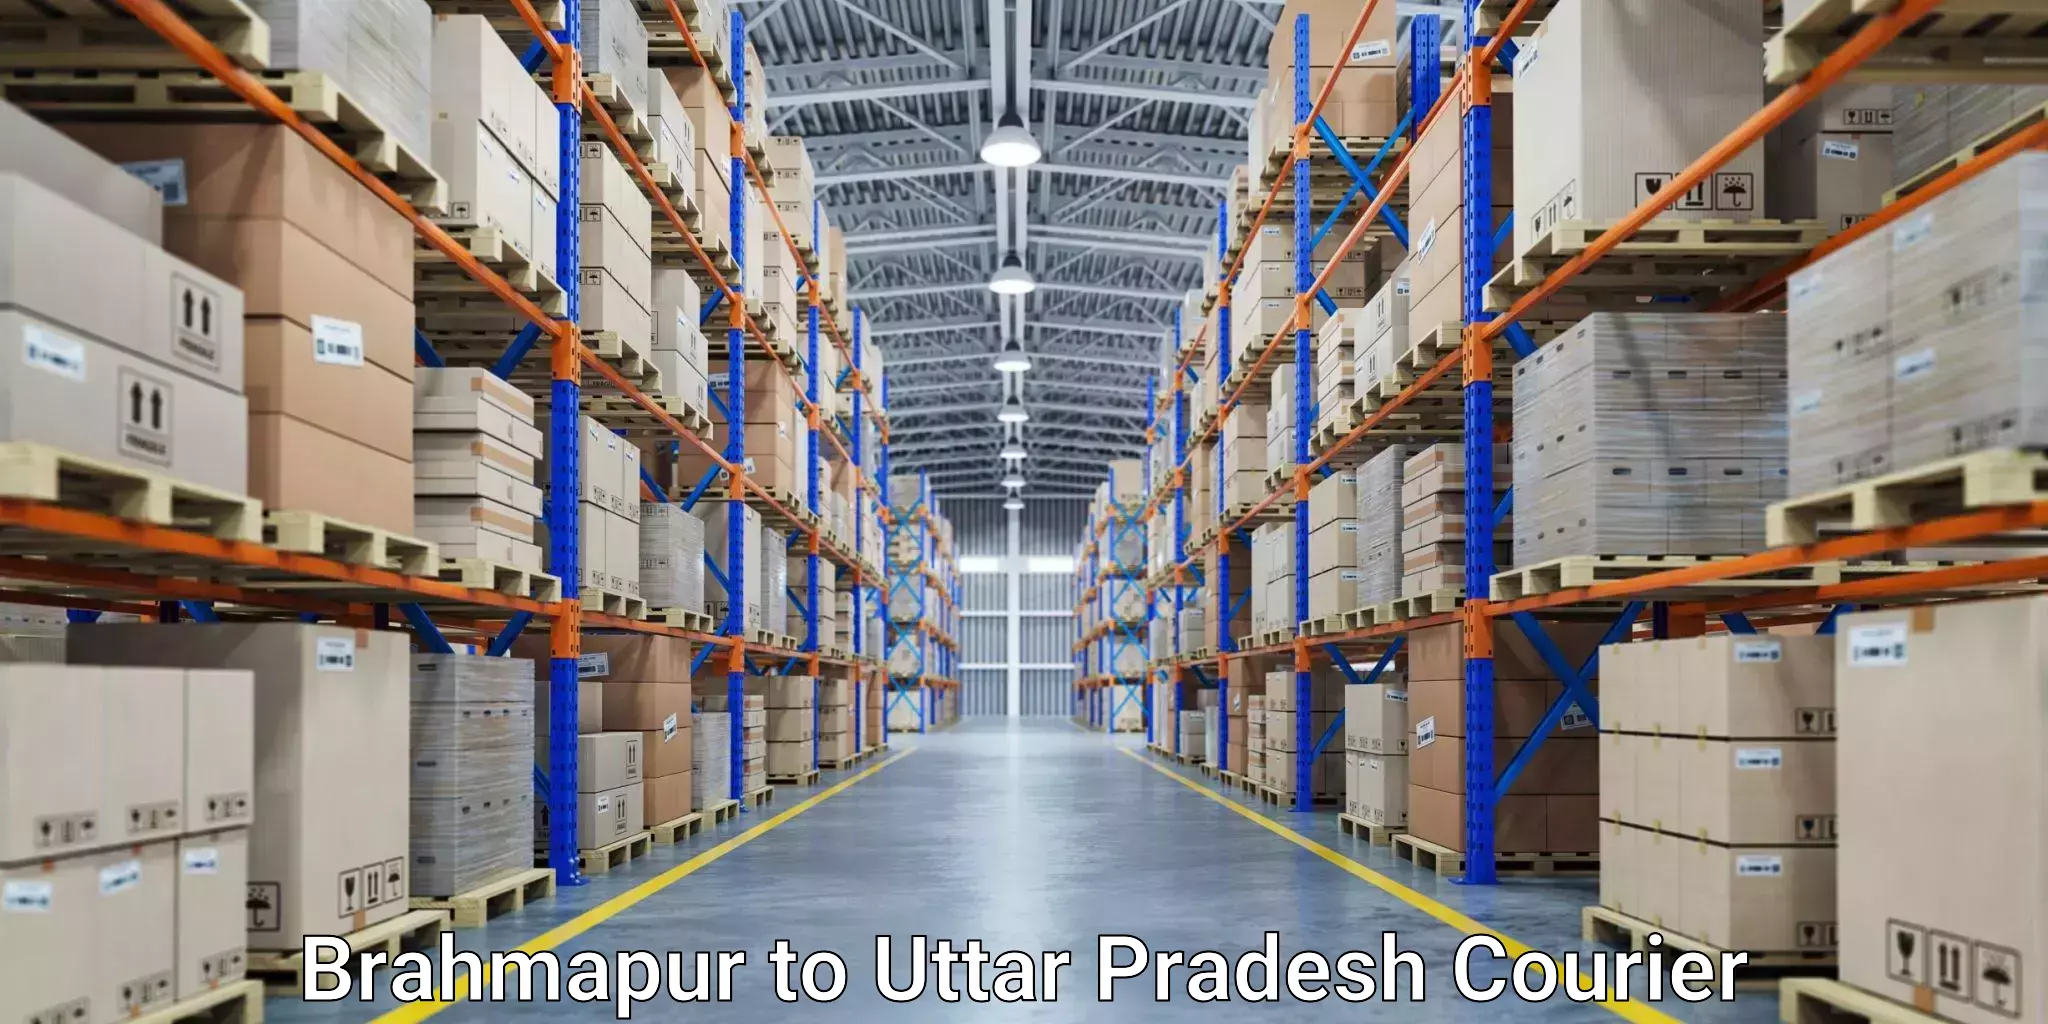 Cost-effective shipping solutions Brahmapur to Sitapur